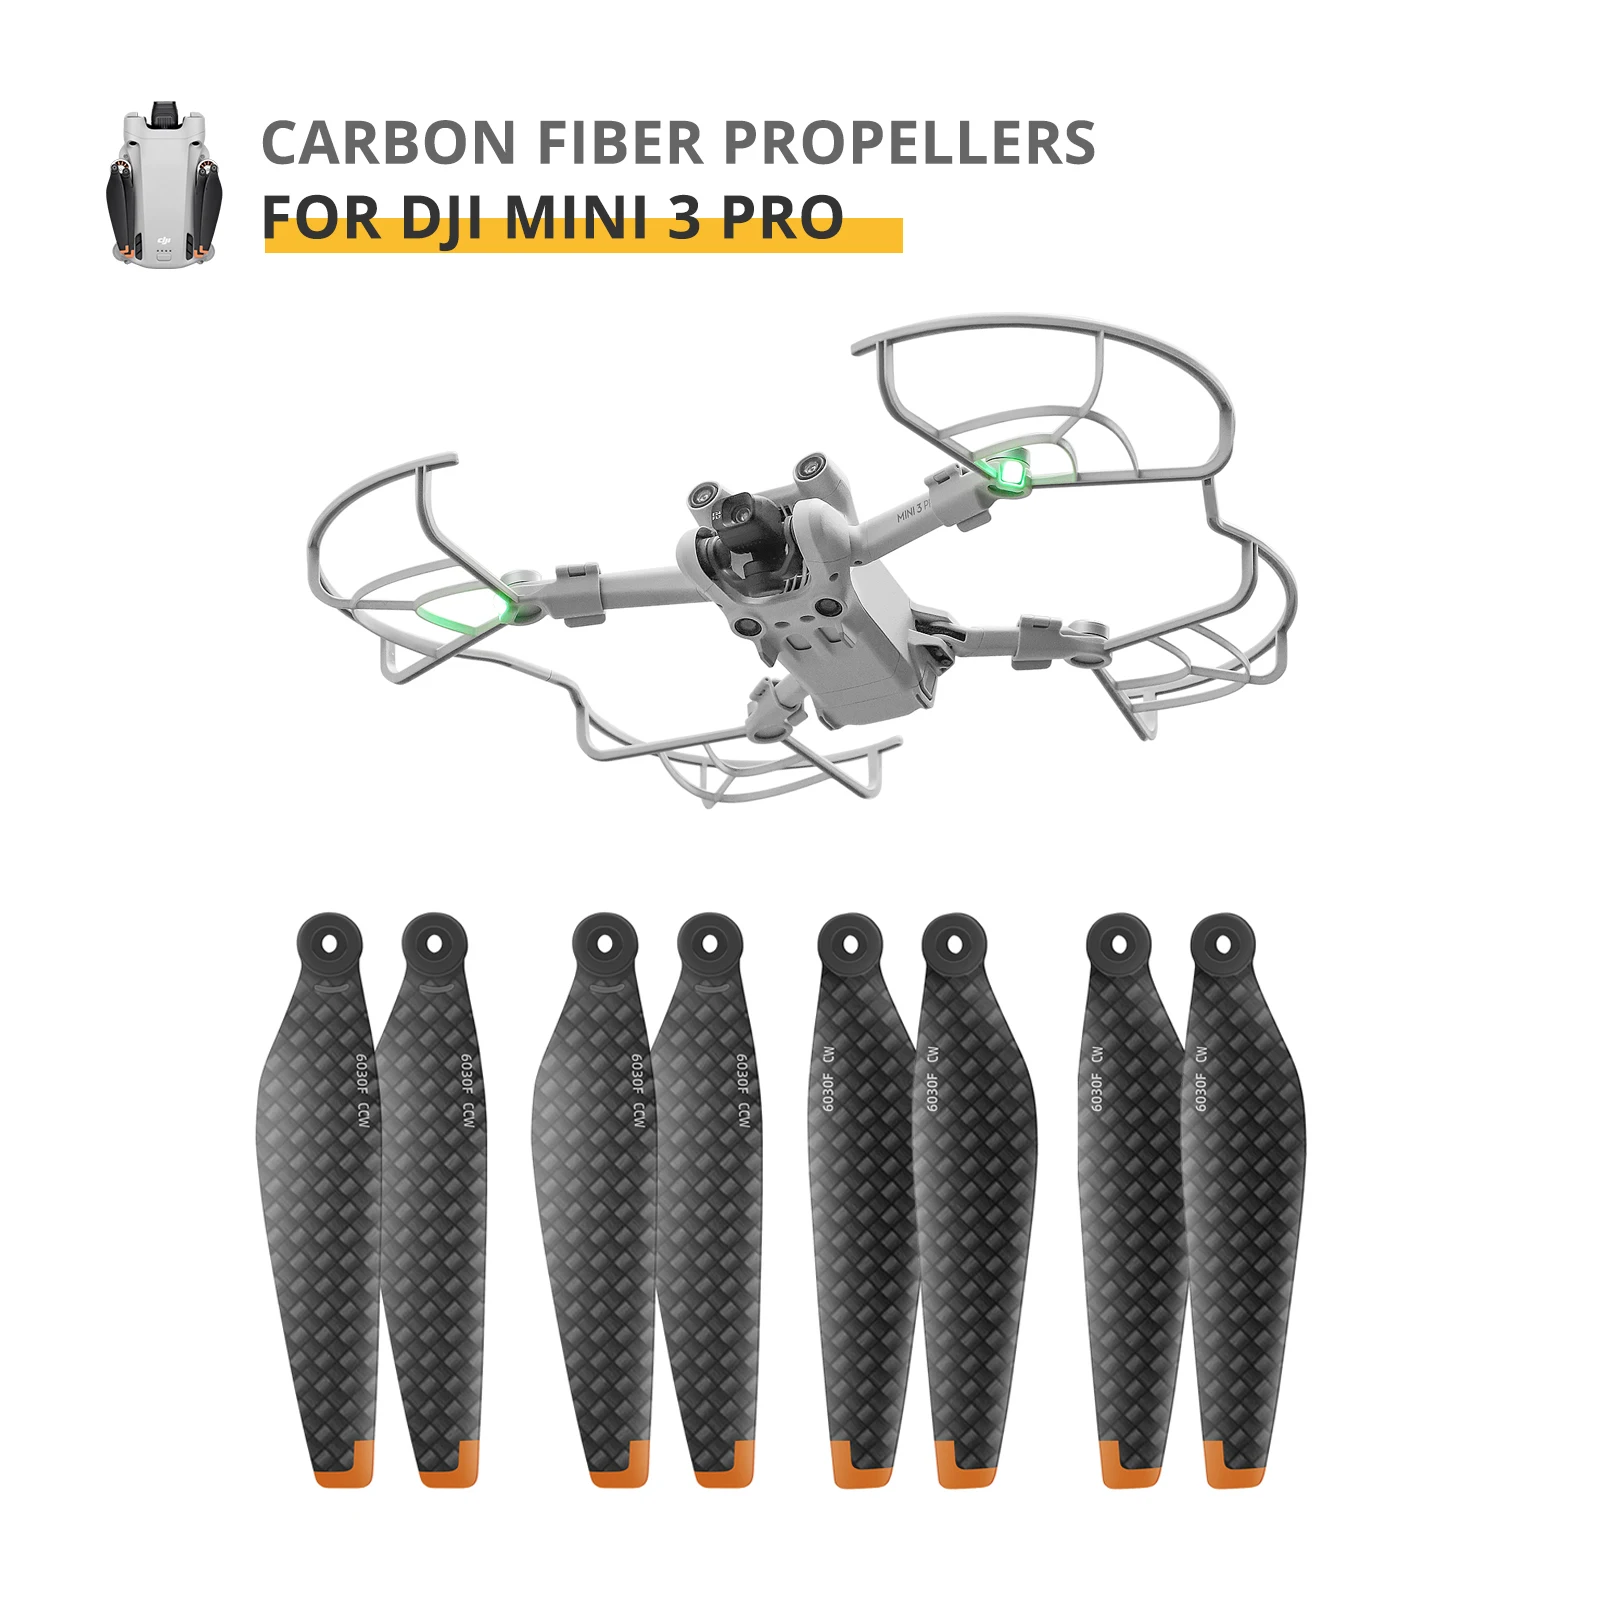 Carbon Fiber Propeller for DJI Mini 3 Pro Lightweight Durable 6030F Propellers Professional Replacement Drone Accessories Kits